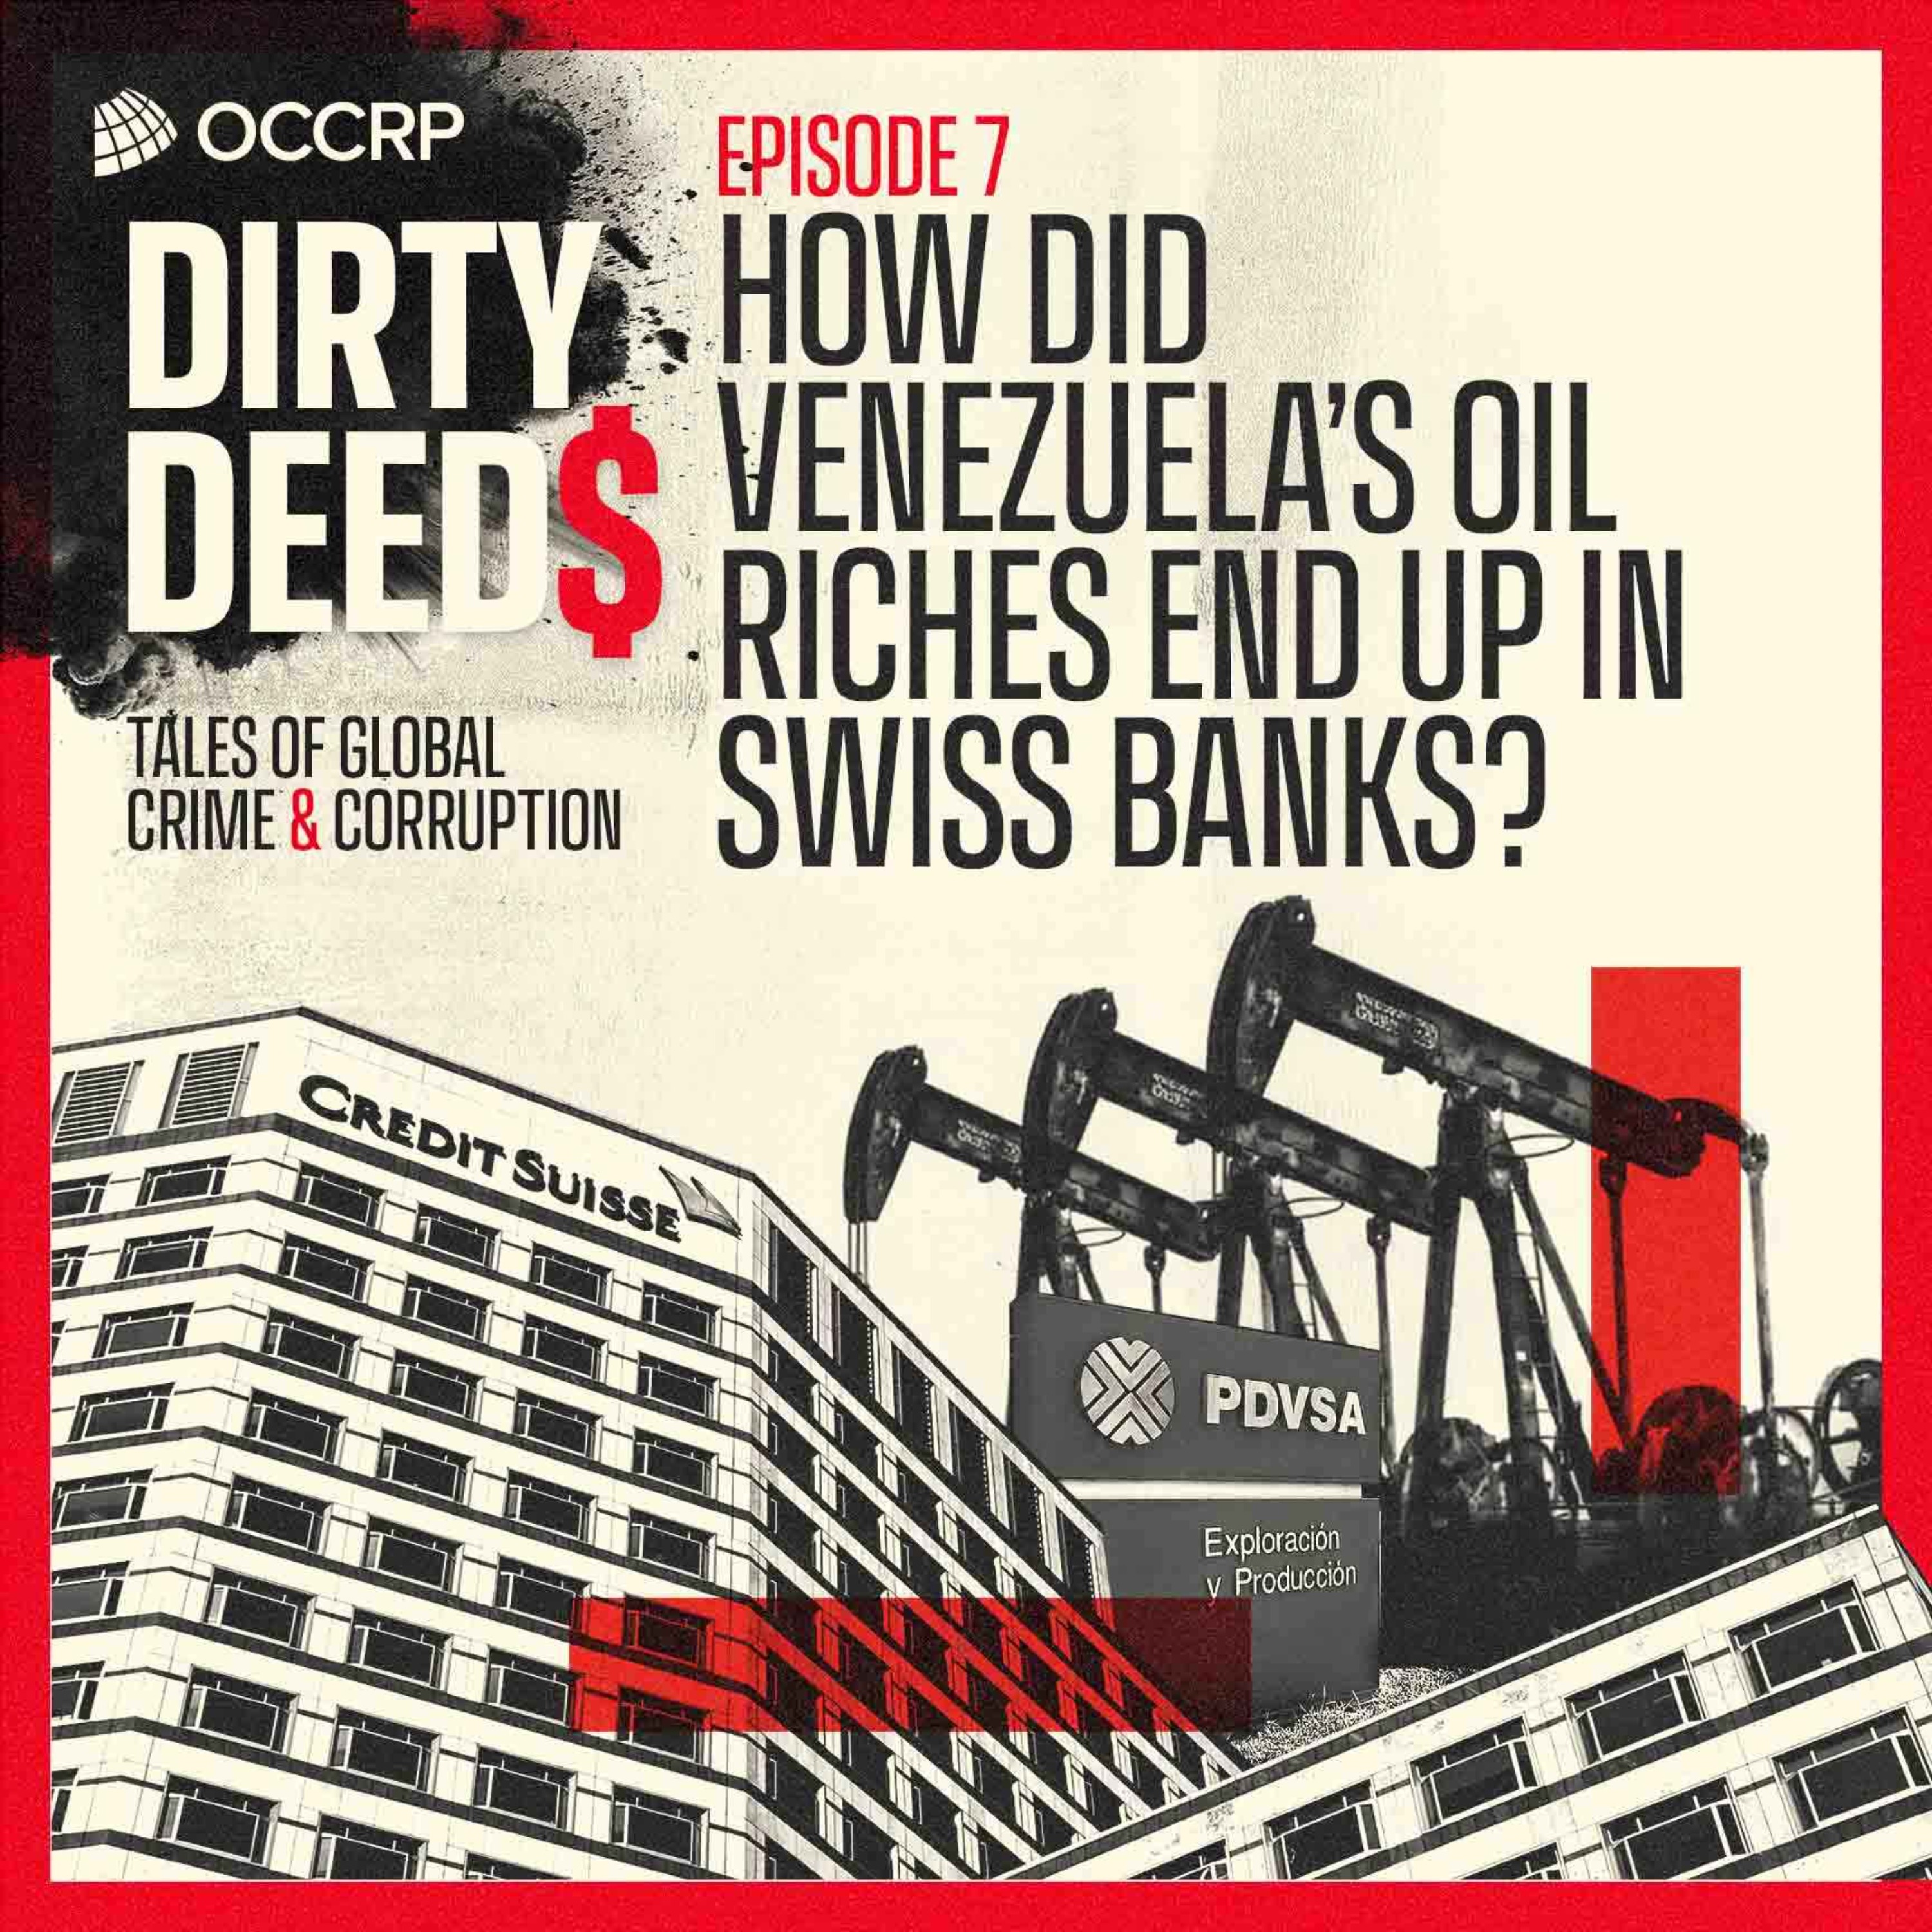 How Did Venezuela’s Oil Riches End up in Swiss Banks?